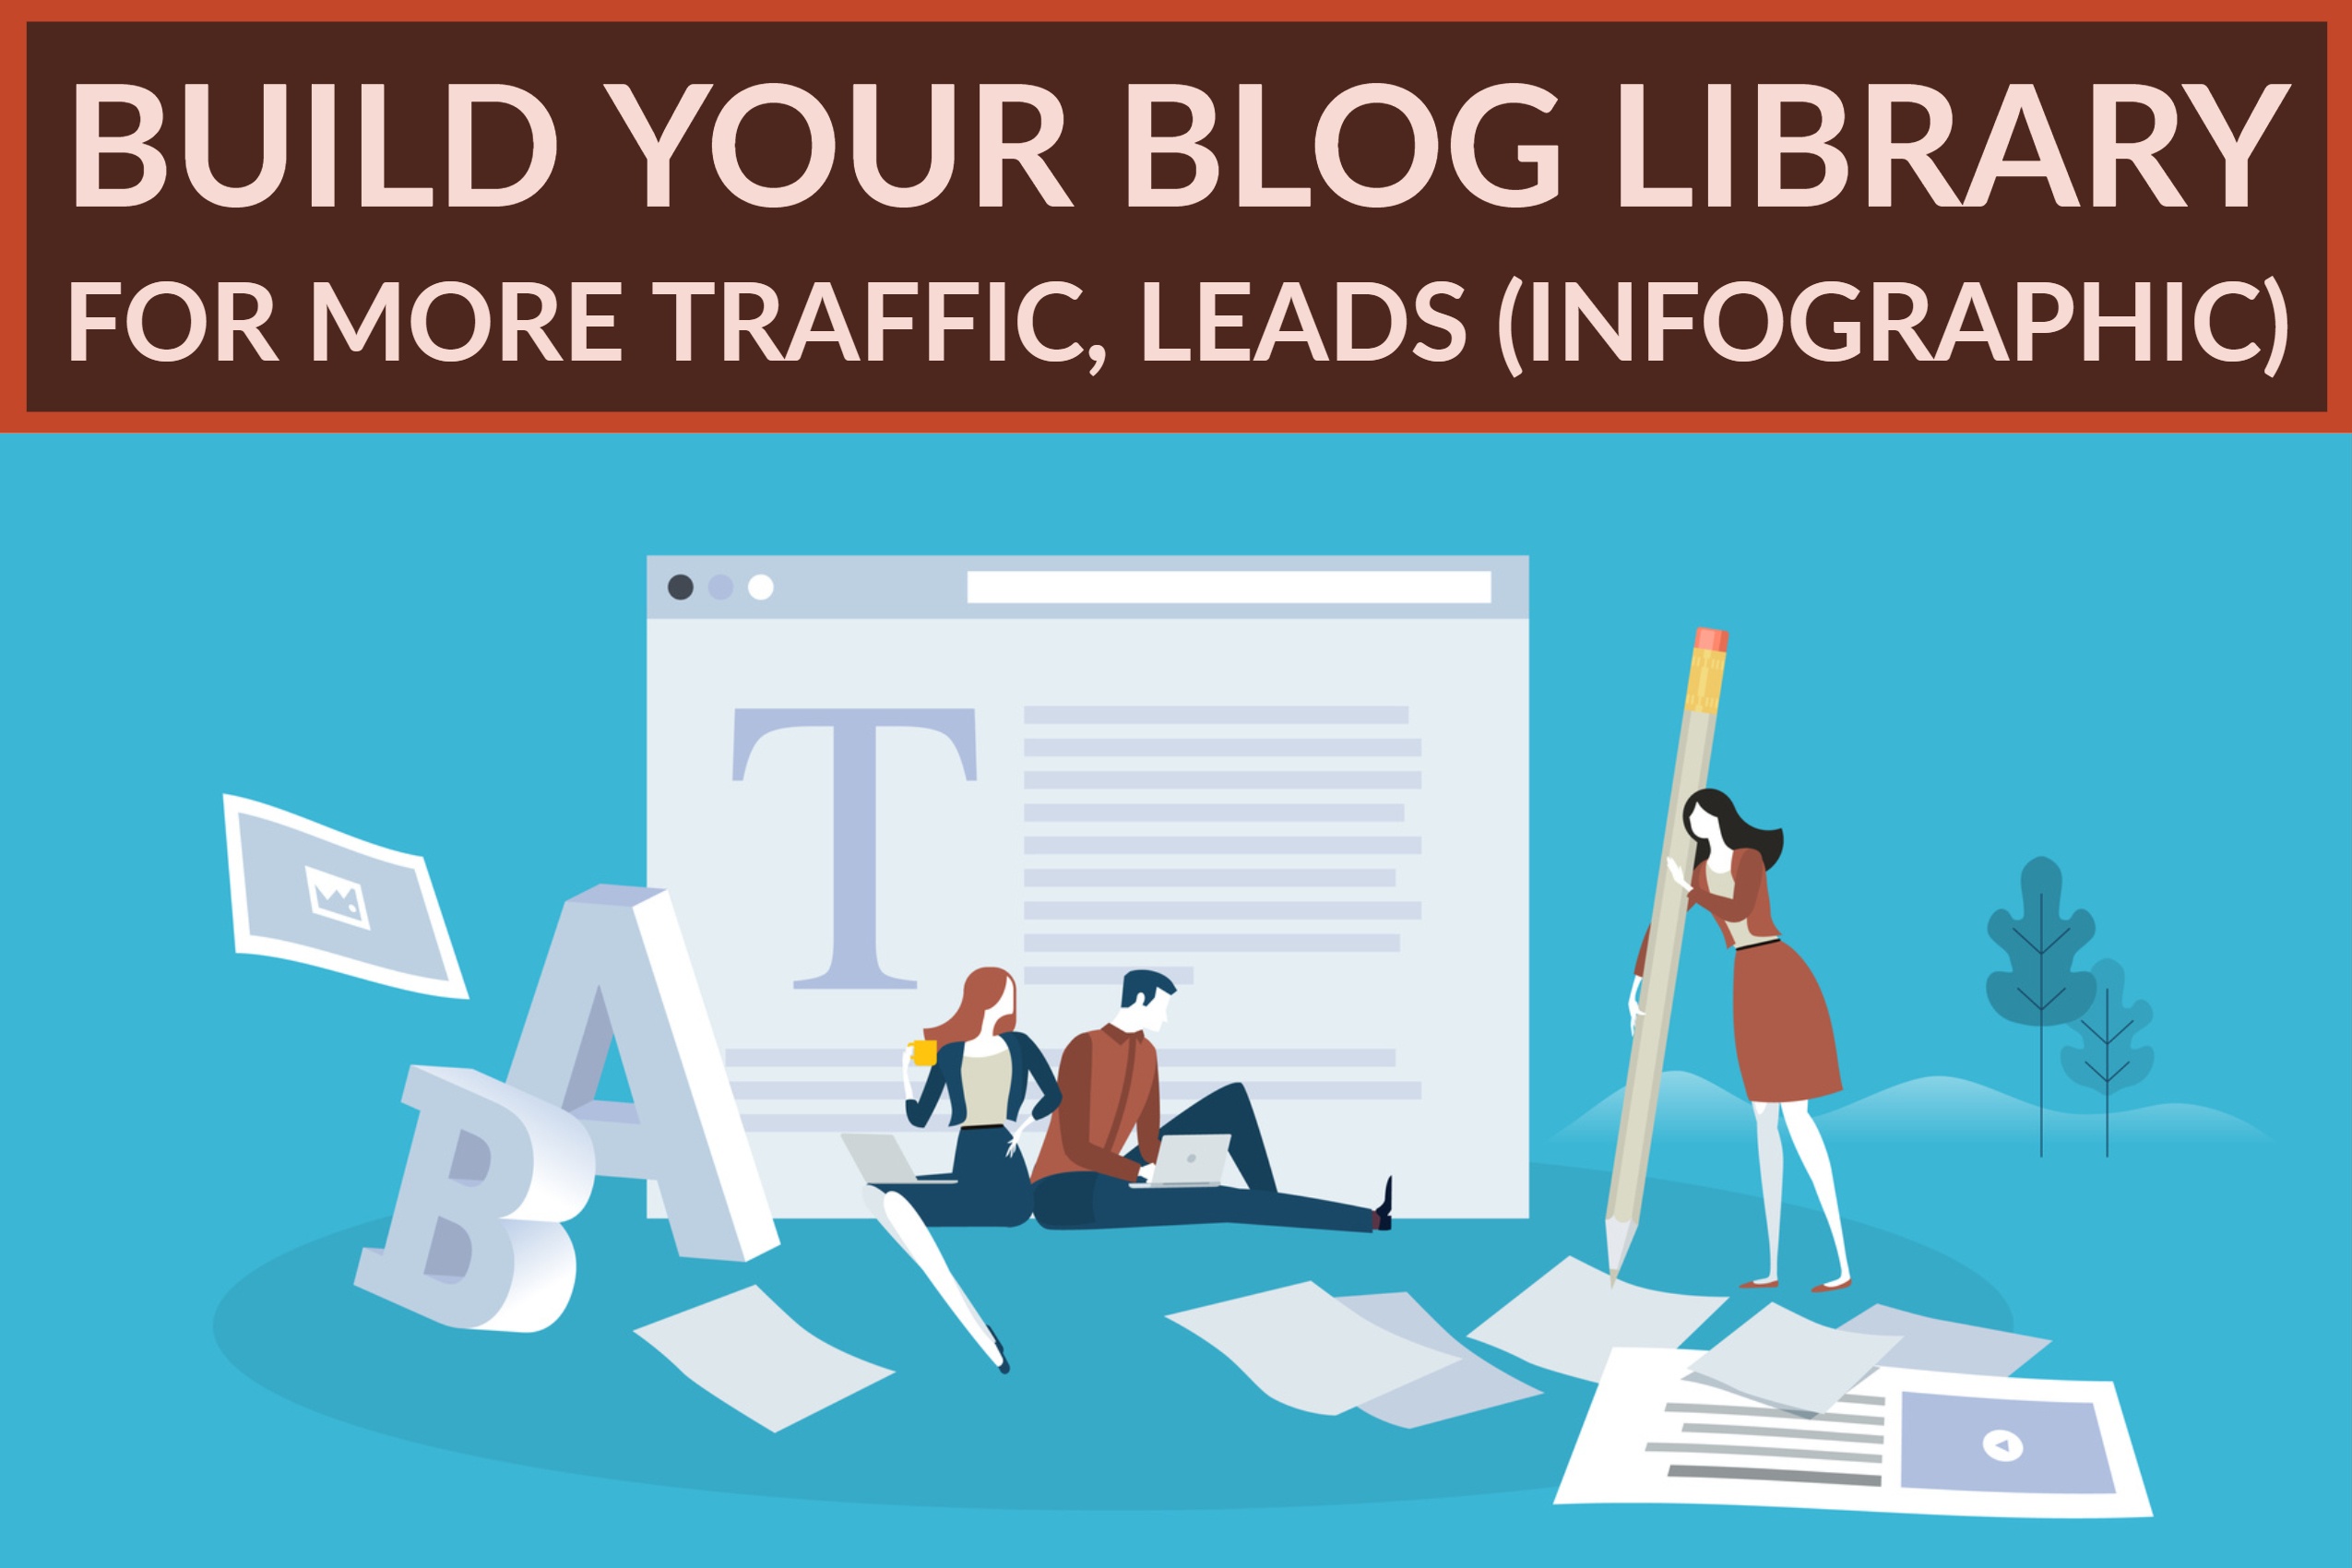 Build Your Blog Library For More Traffic, Leads (infographic)